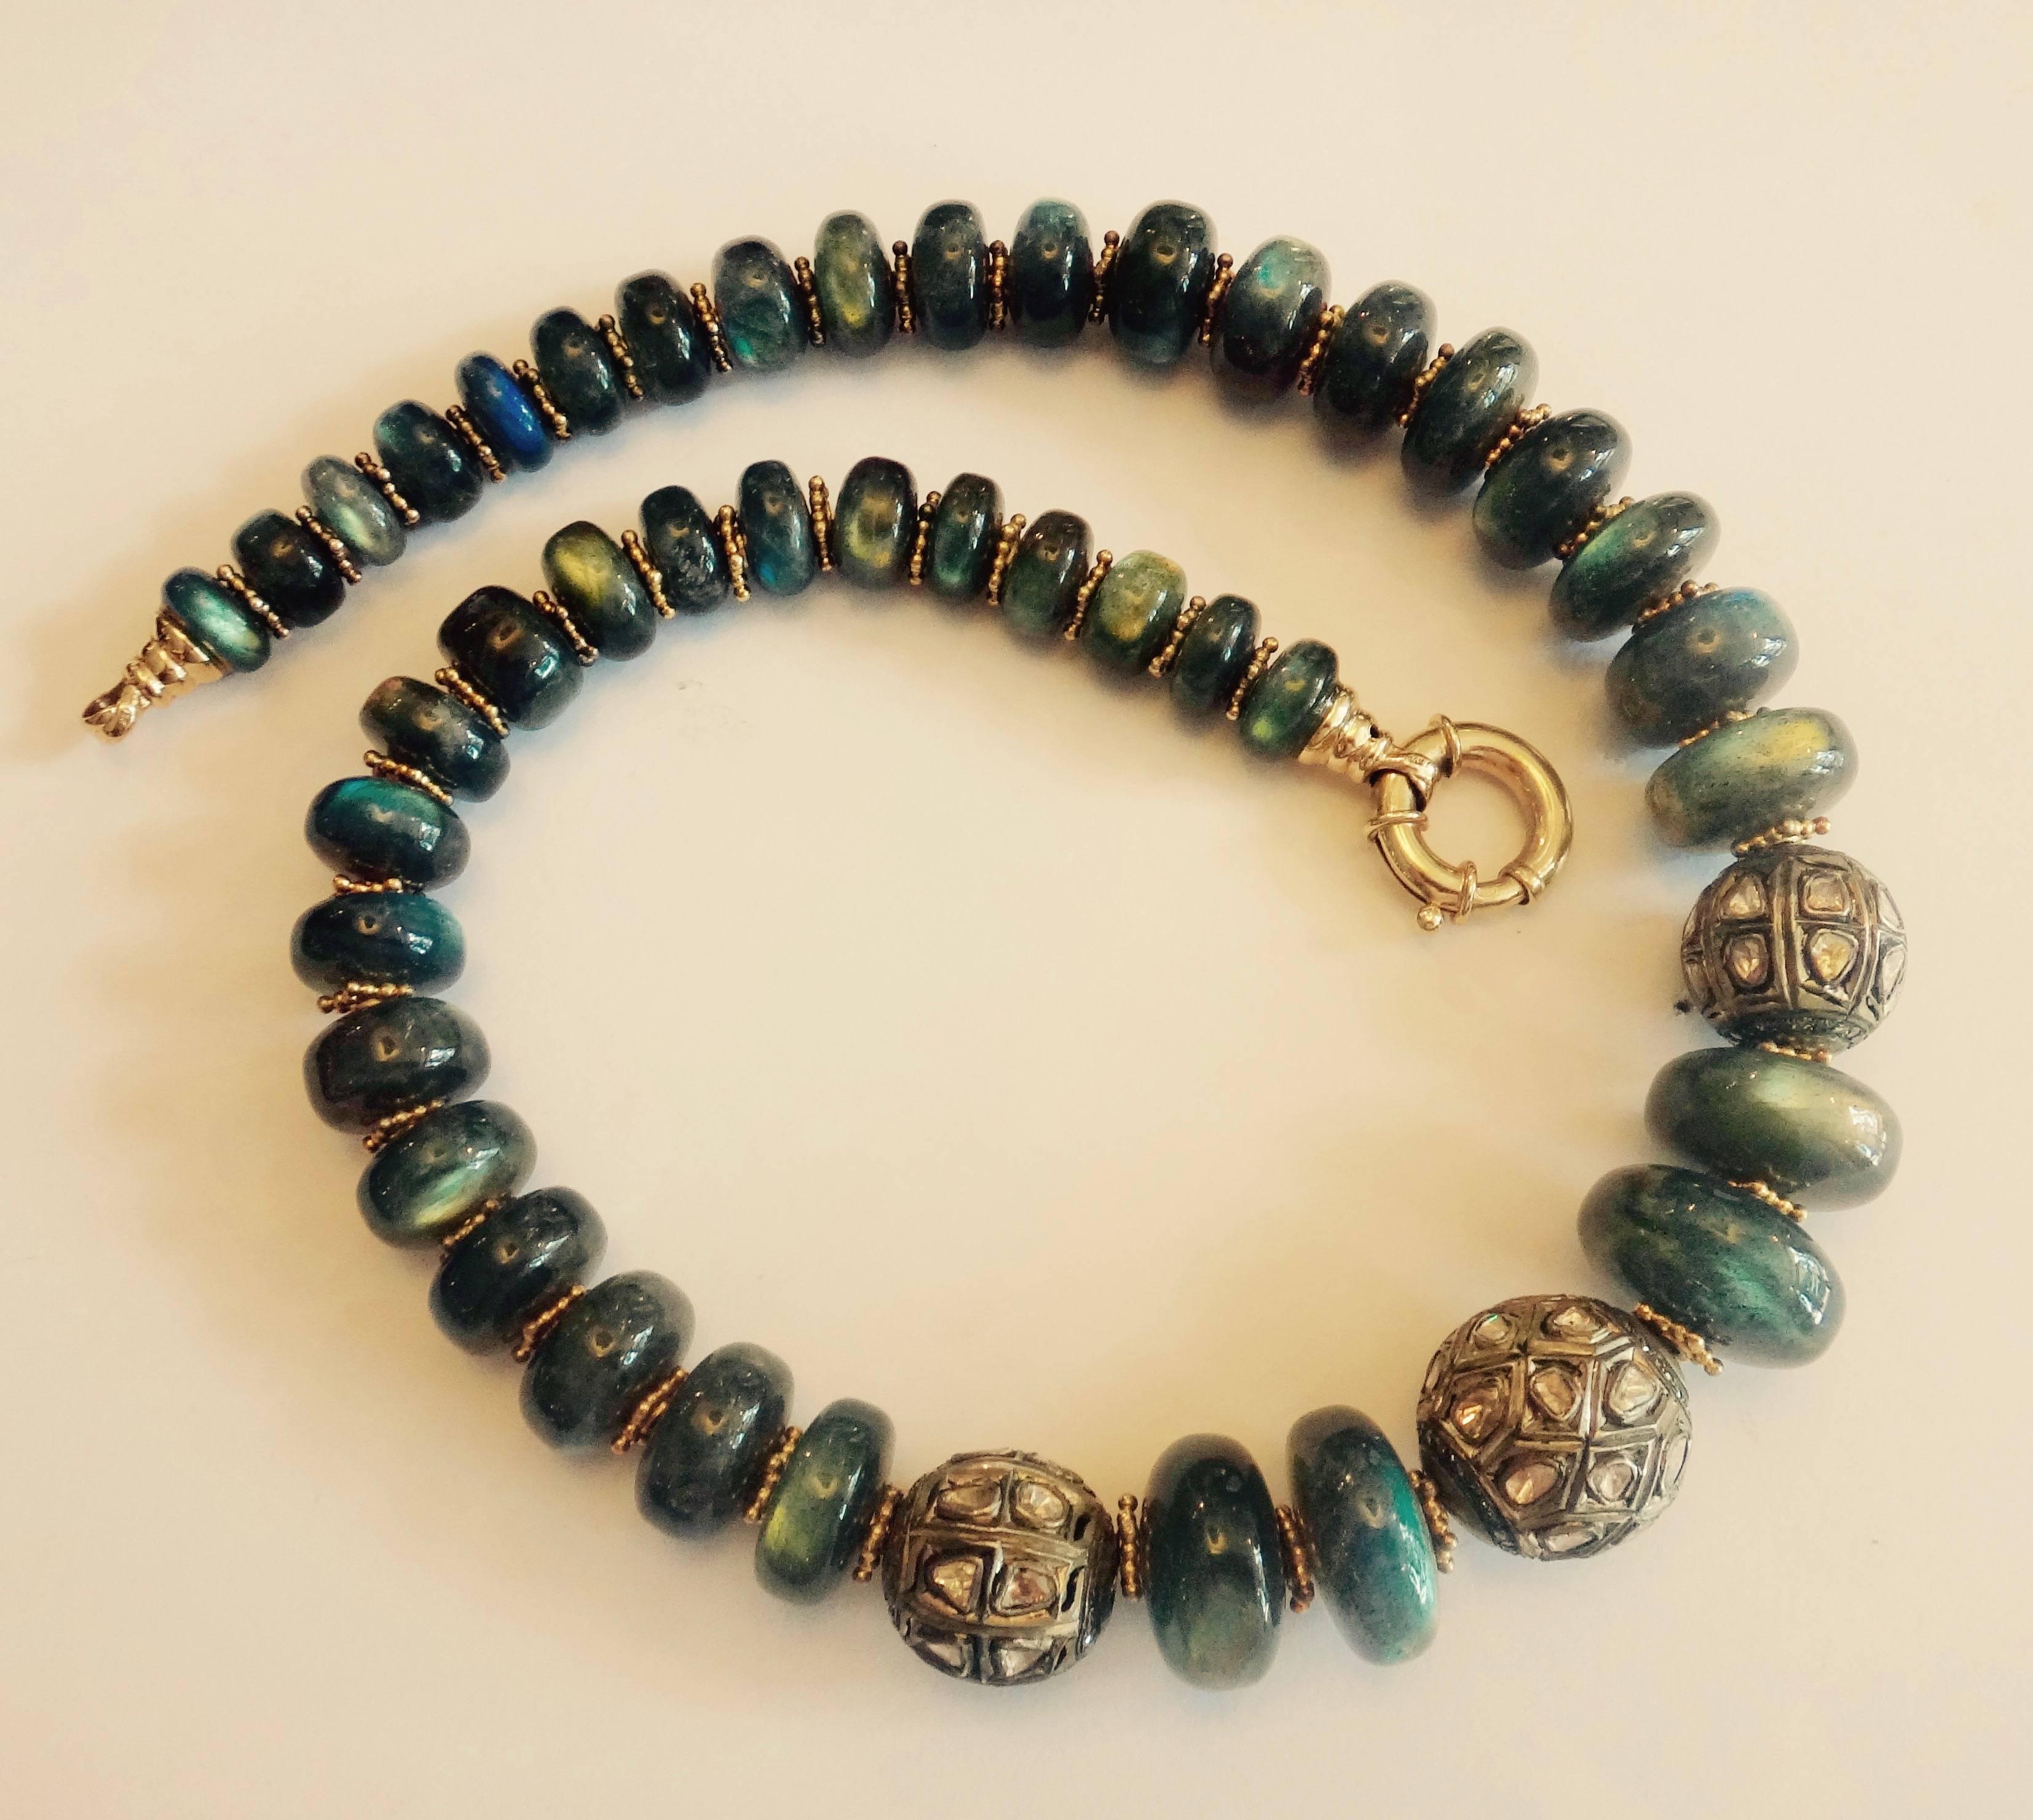 Large and flashy labradorite beads graduating from 20mm to 12mm are embellished with three silver 